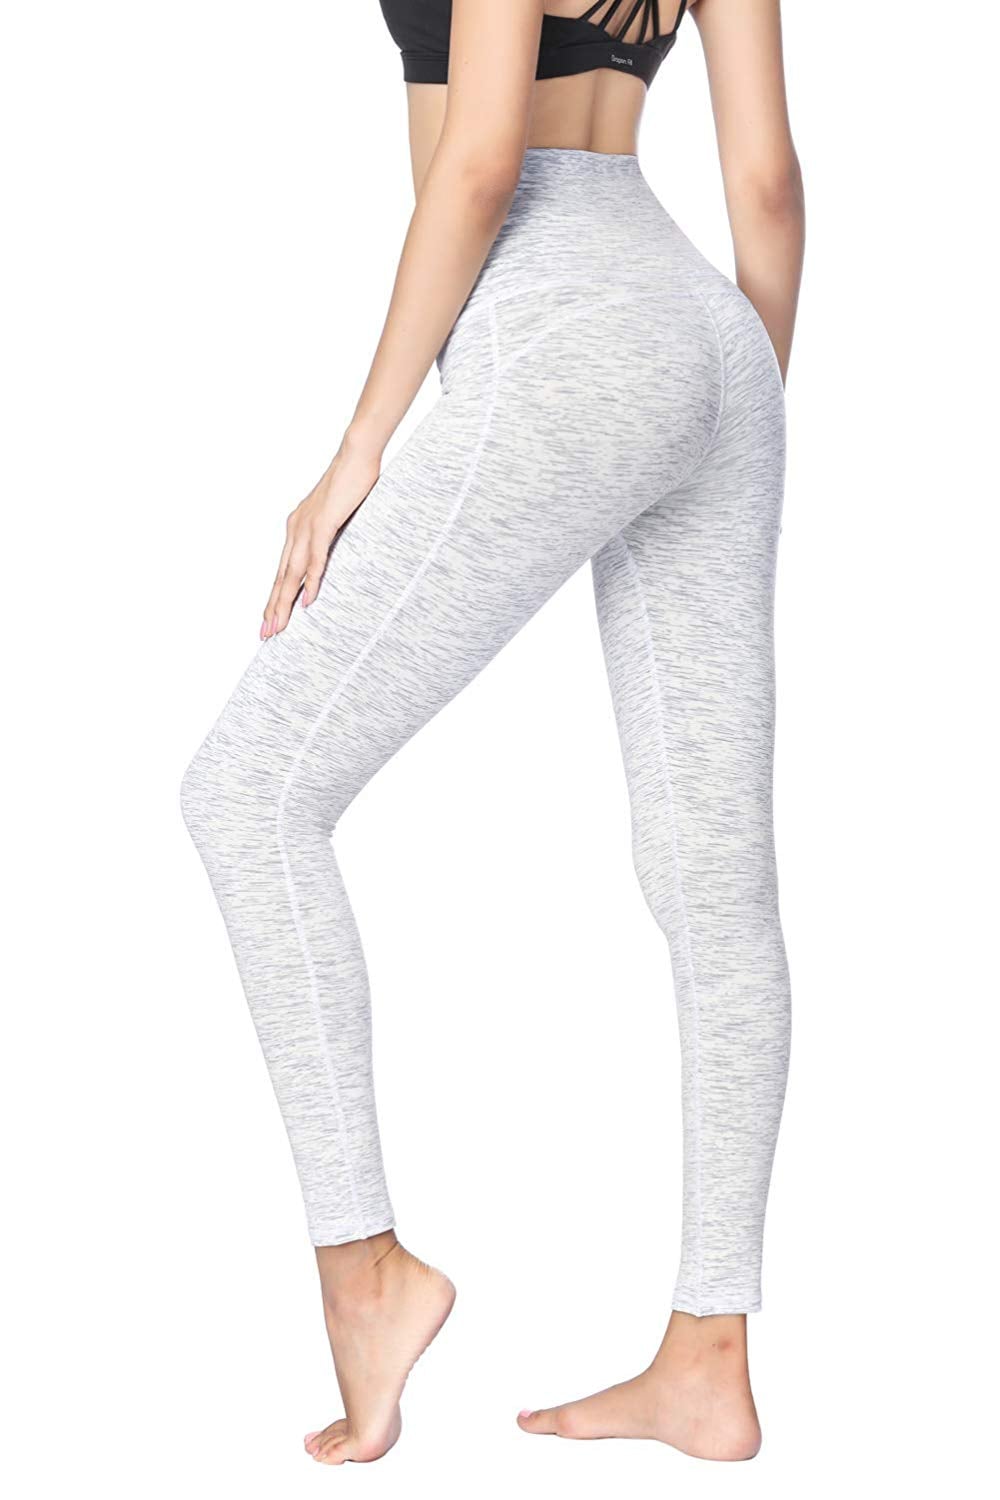 Dragon Fit Compression Yoga Pants, Who Can Resist New Leggings? These  Top-Rated Pairs From  Start at Just $12